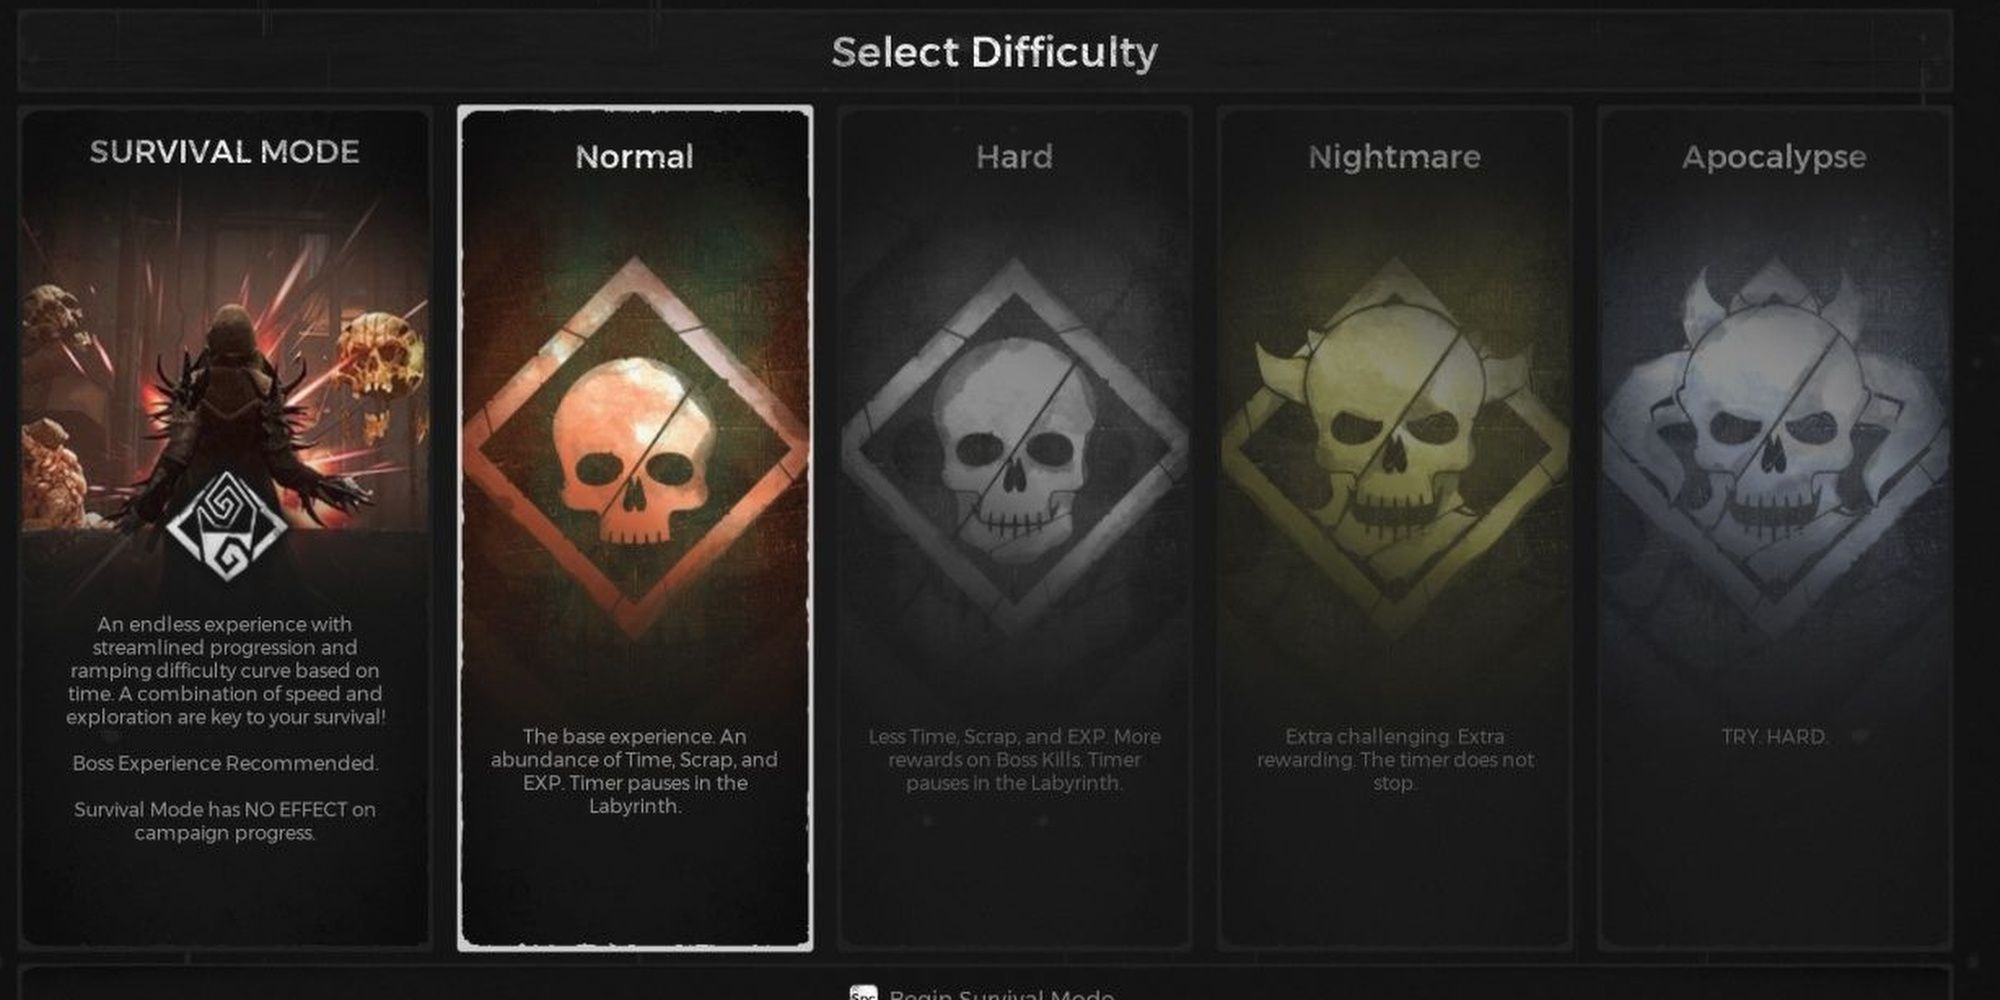 Remnant From The Ashes: The Difficulty Options And Survival Mode Menu